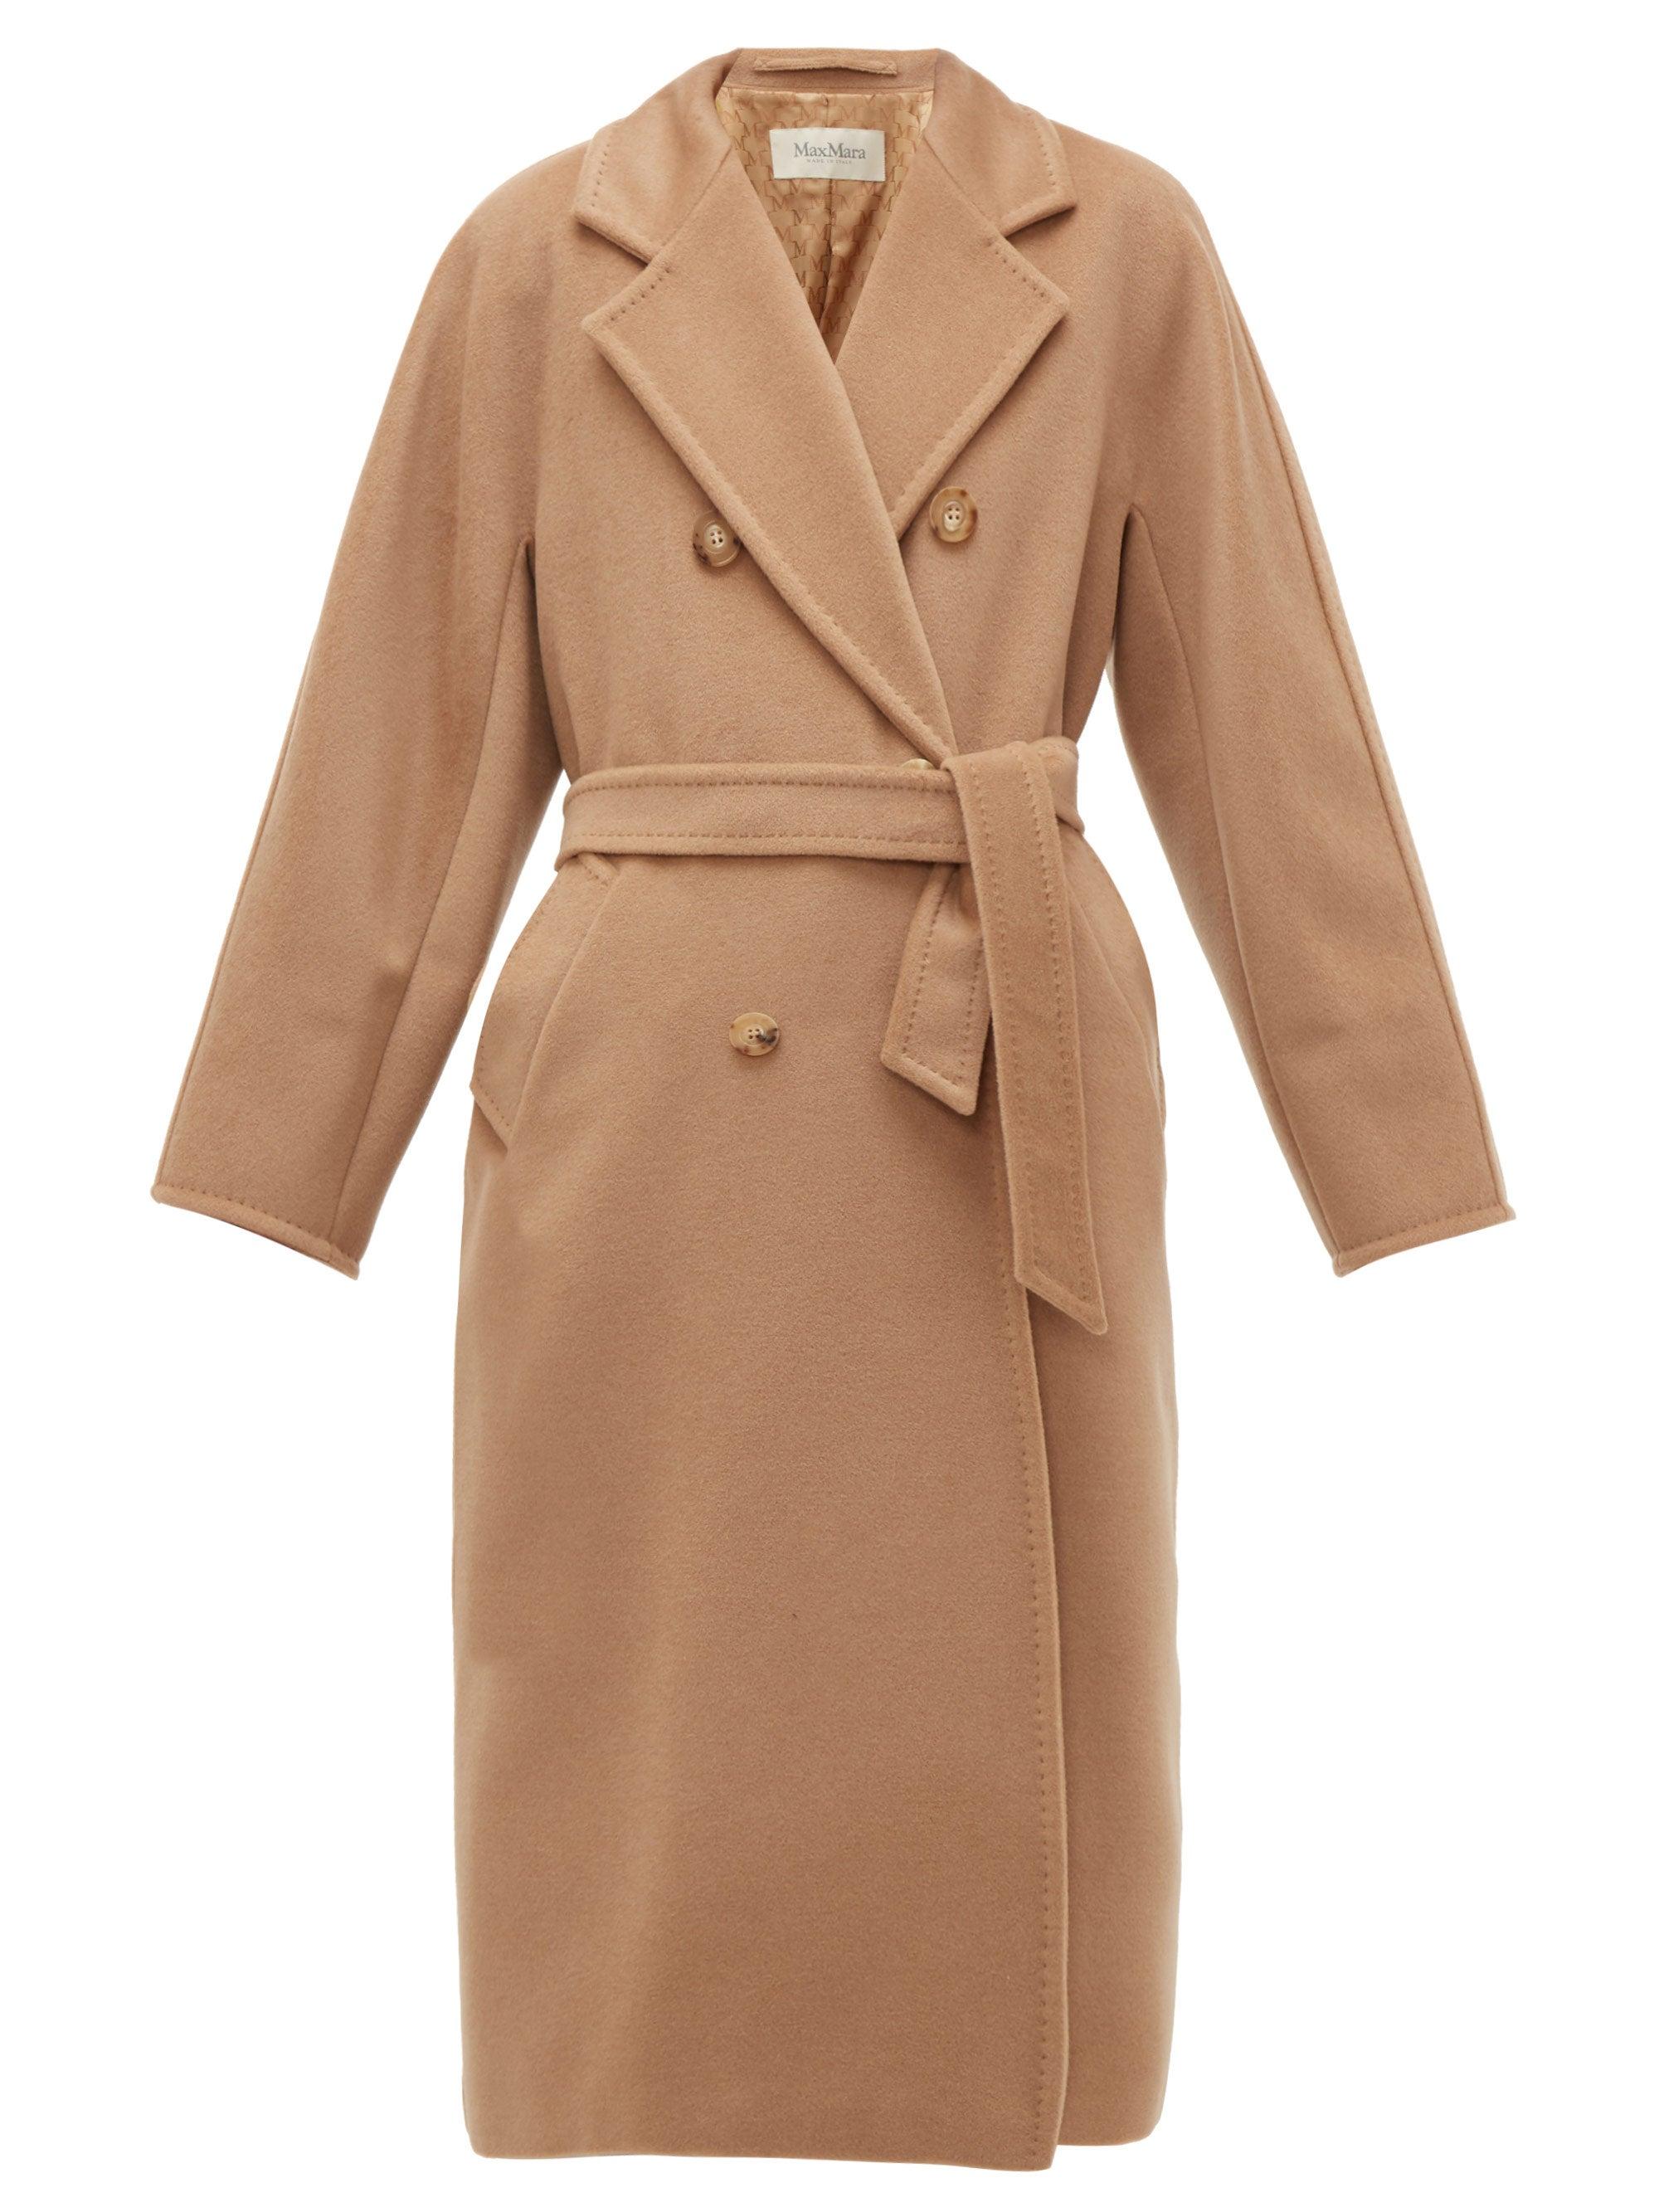 Max Mara Wool Madame Icon Coat in Beige (Natural) - Save 17% - Lyst